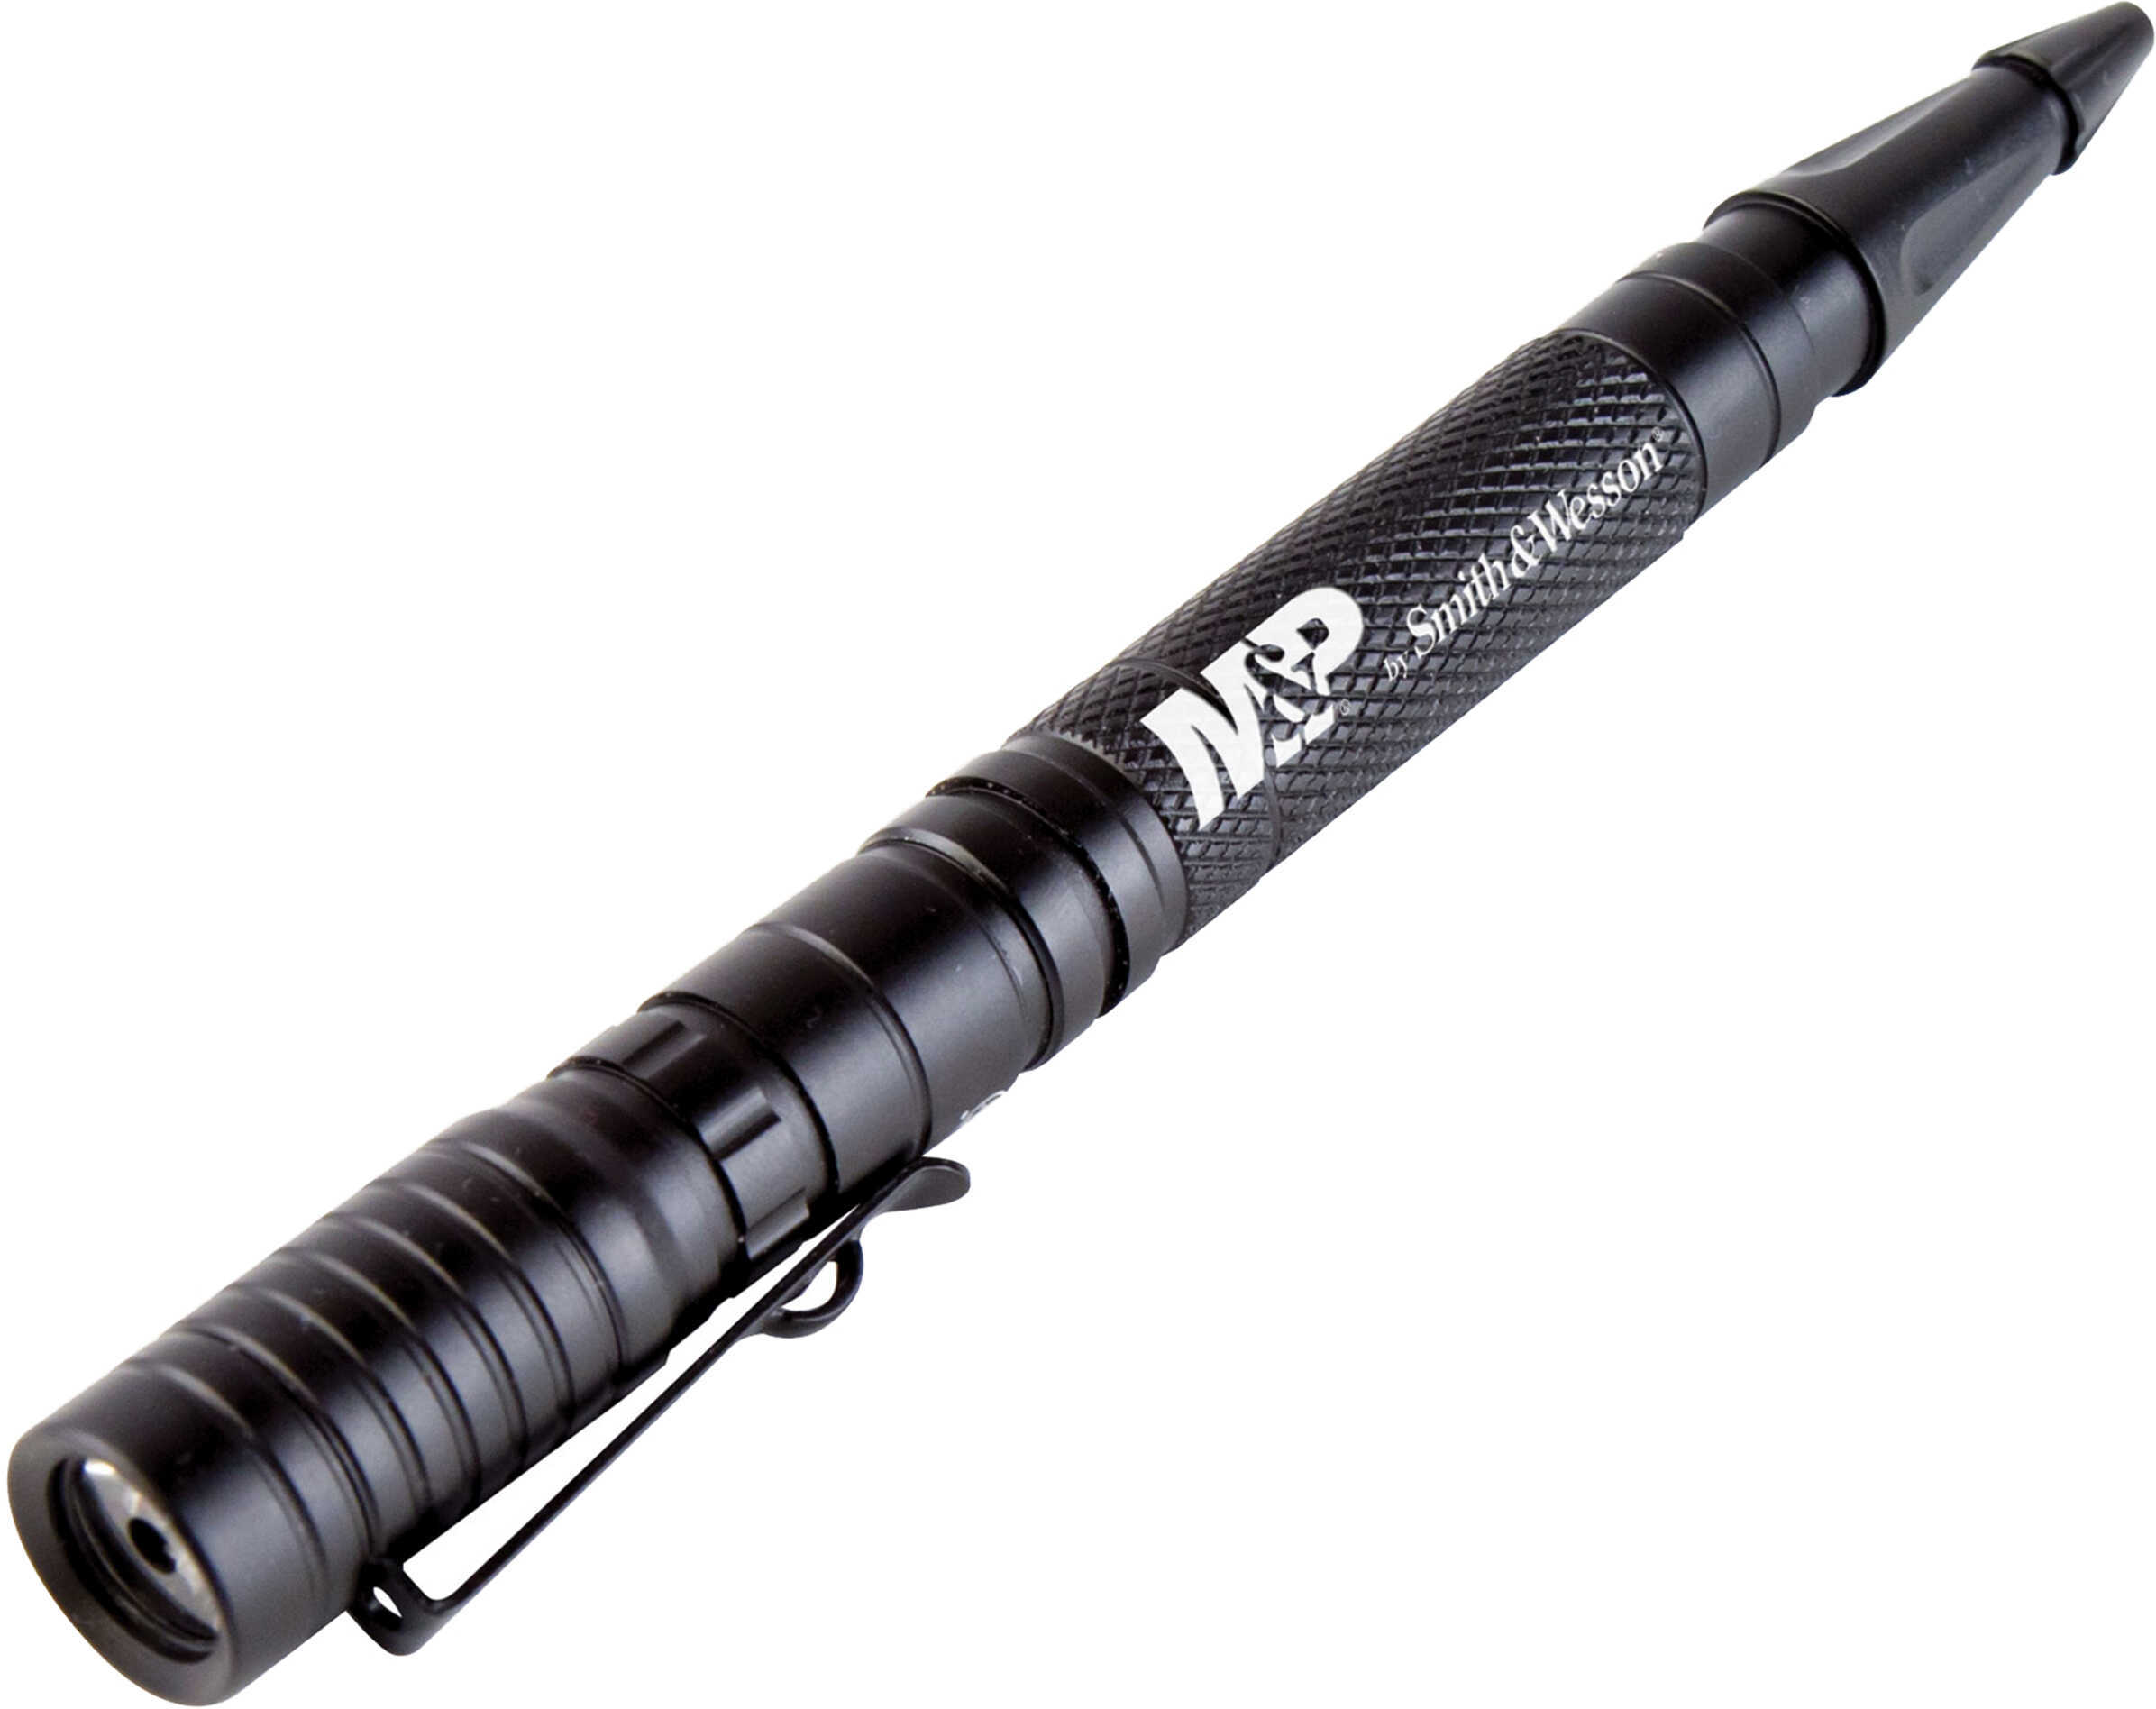 Smith & Wesson Accessories Delta Force Flashlight PL-10 Tactical Pen, LED with 1 AAA Battery Aluminum Black Md: 11